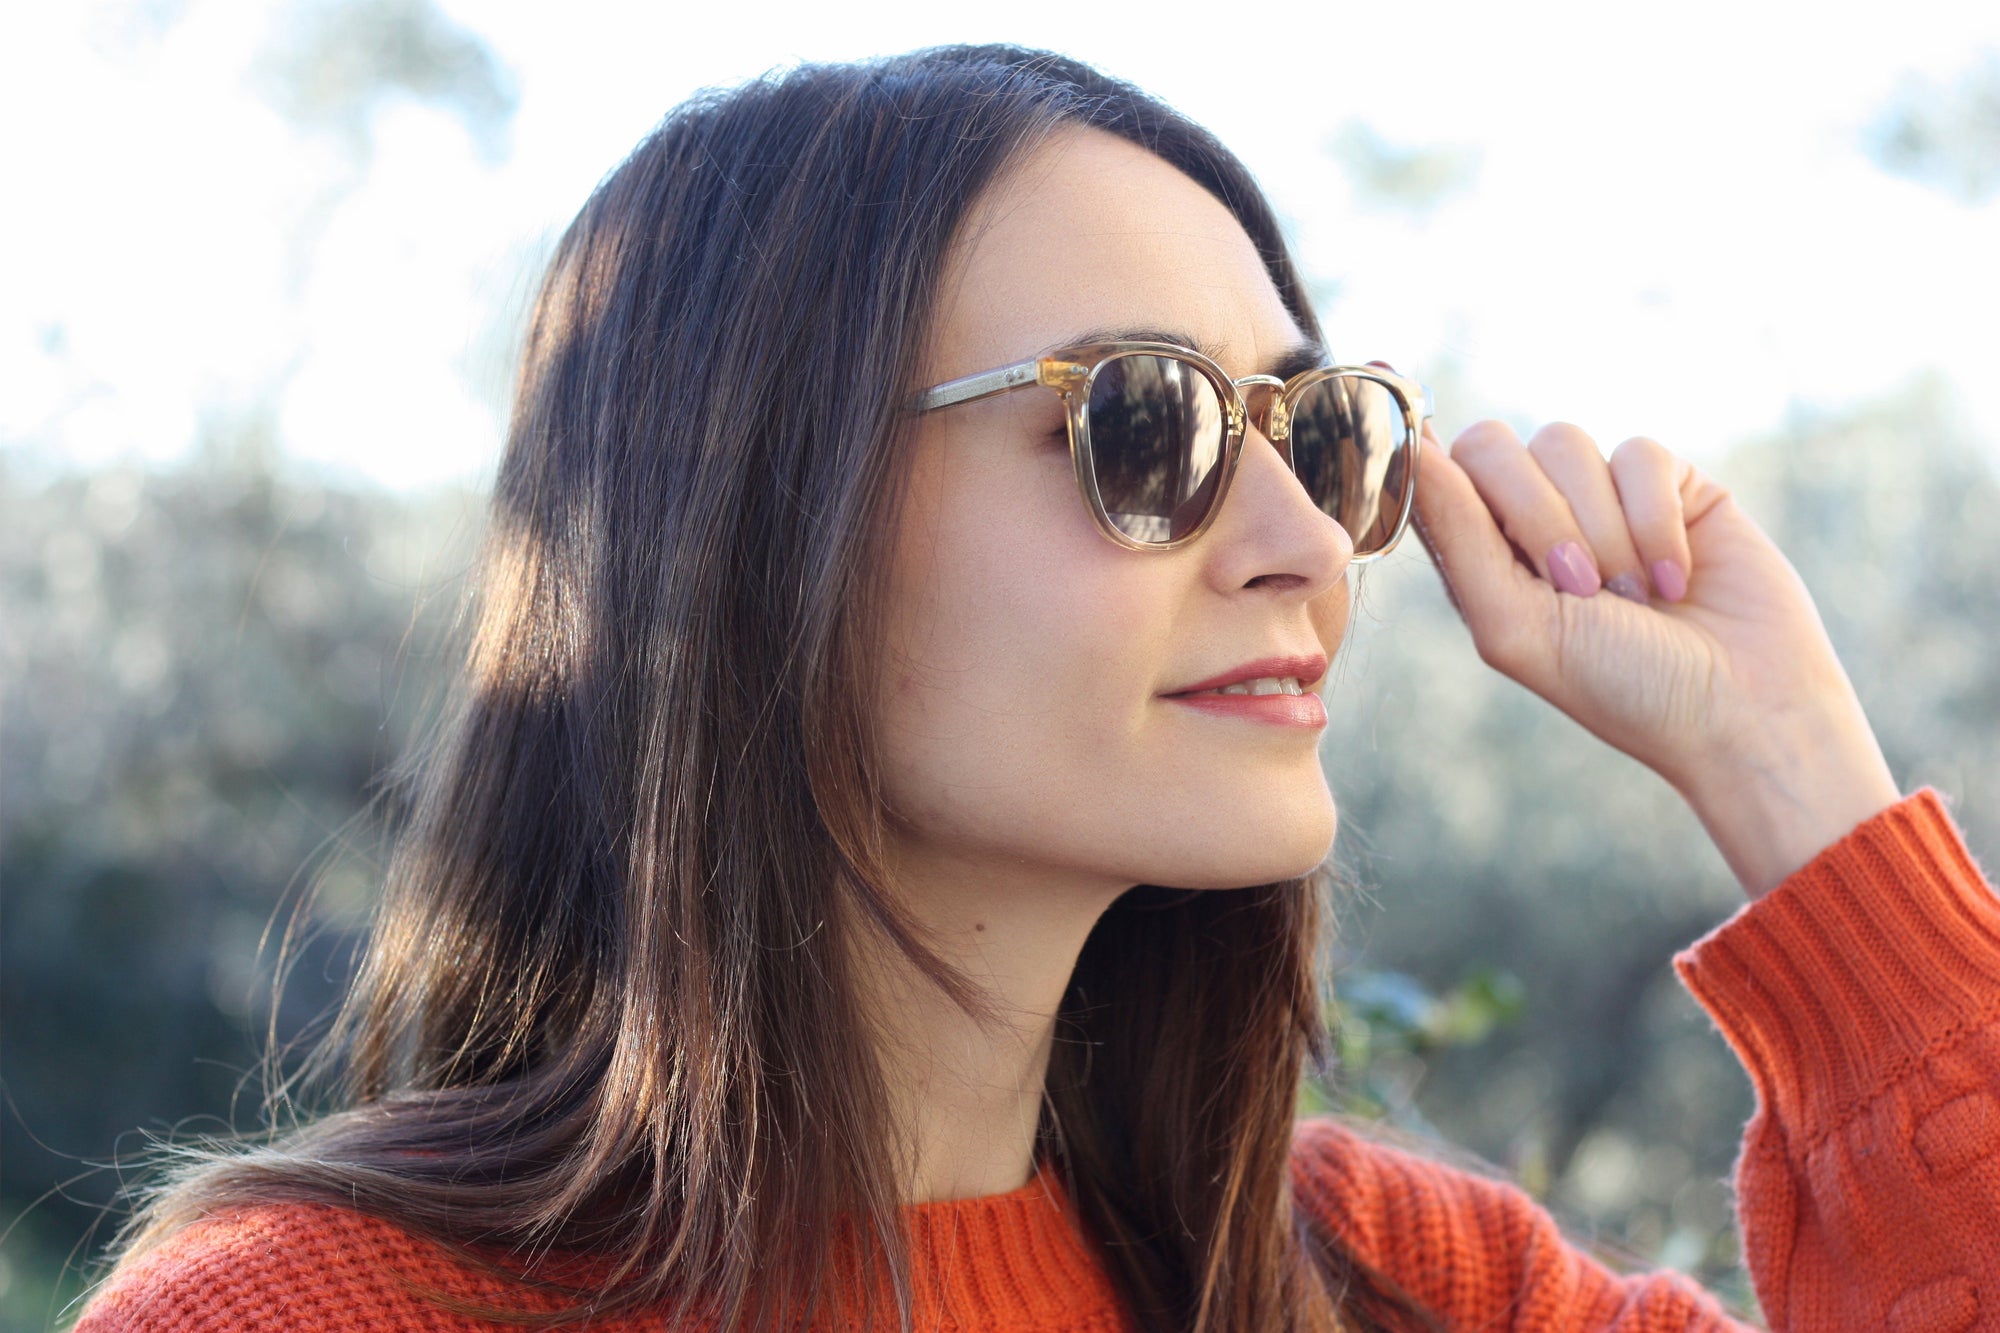 How can I look better without my glasses? | KOALAEYE OPTICAL